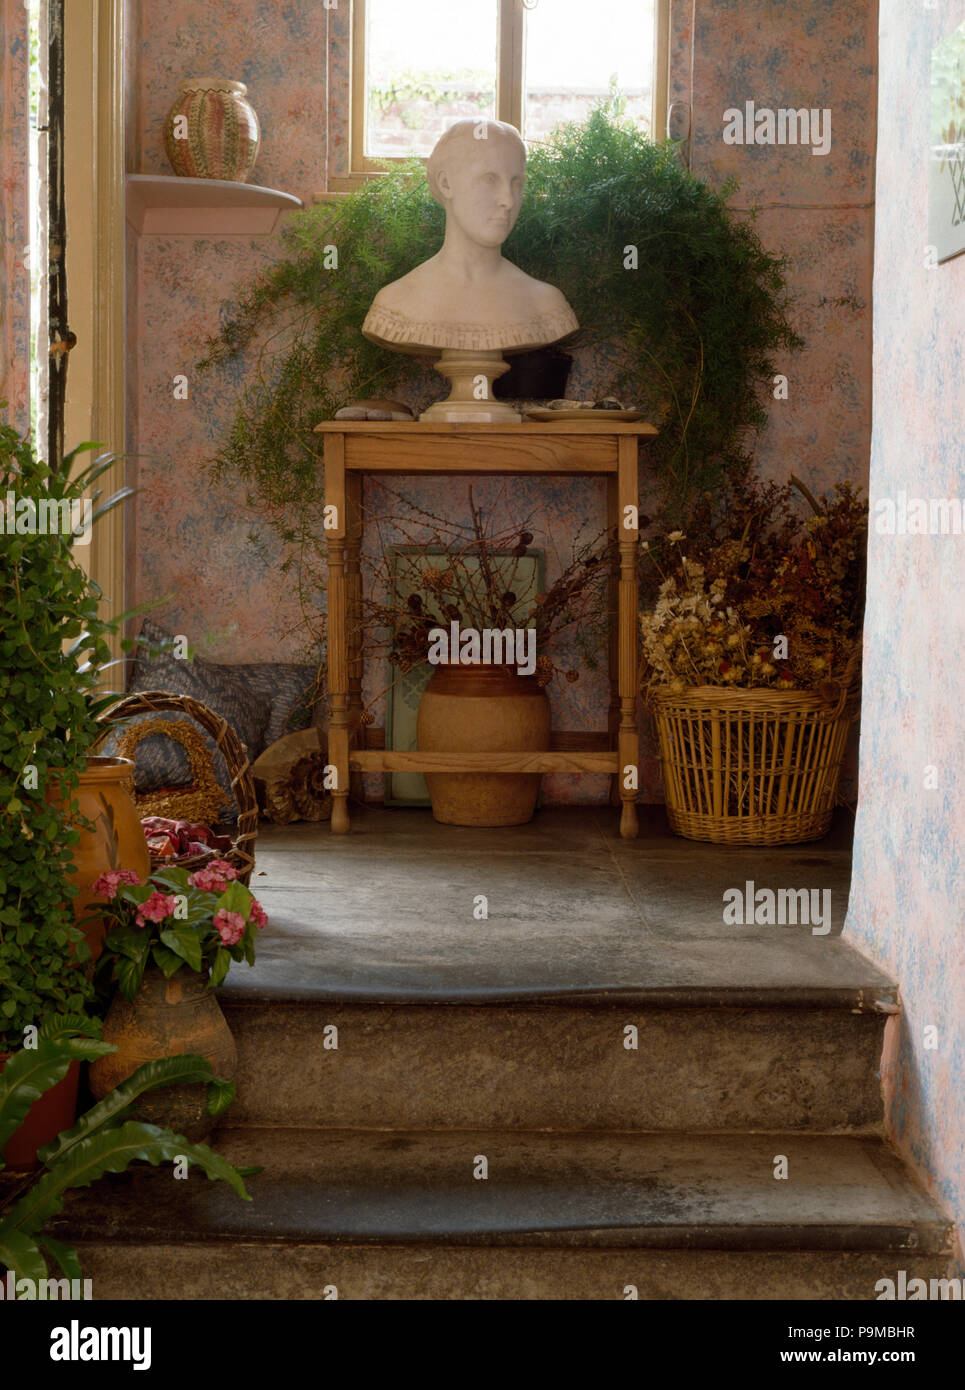 Stone steps in small hall with classical bust on a pine table with a lush green pot plant Stock Photo